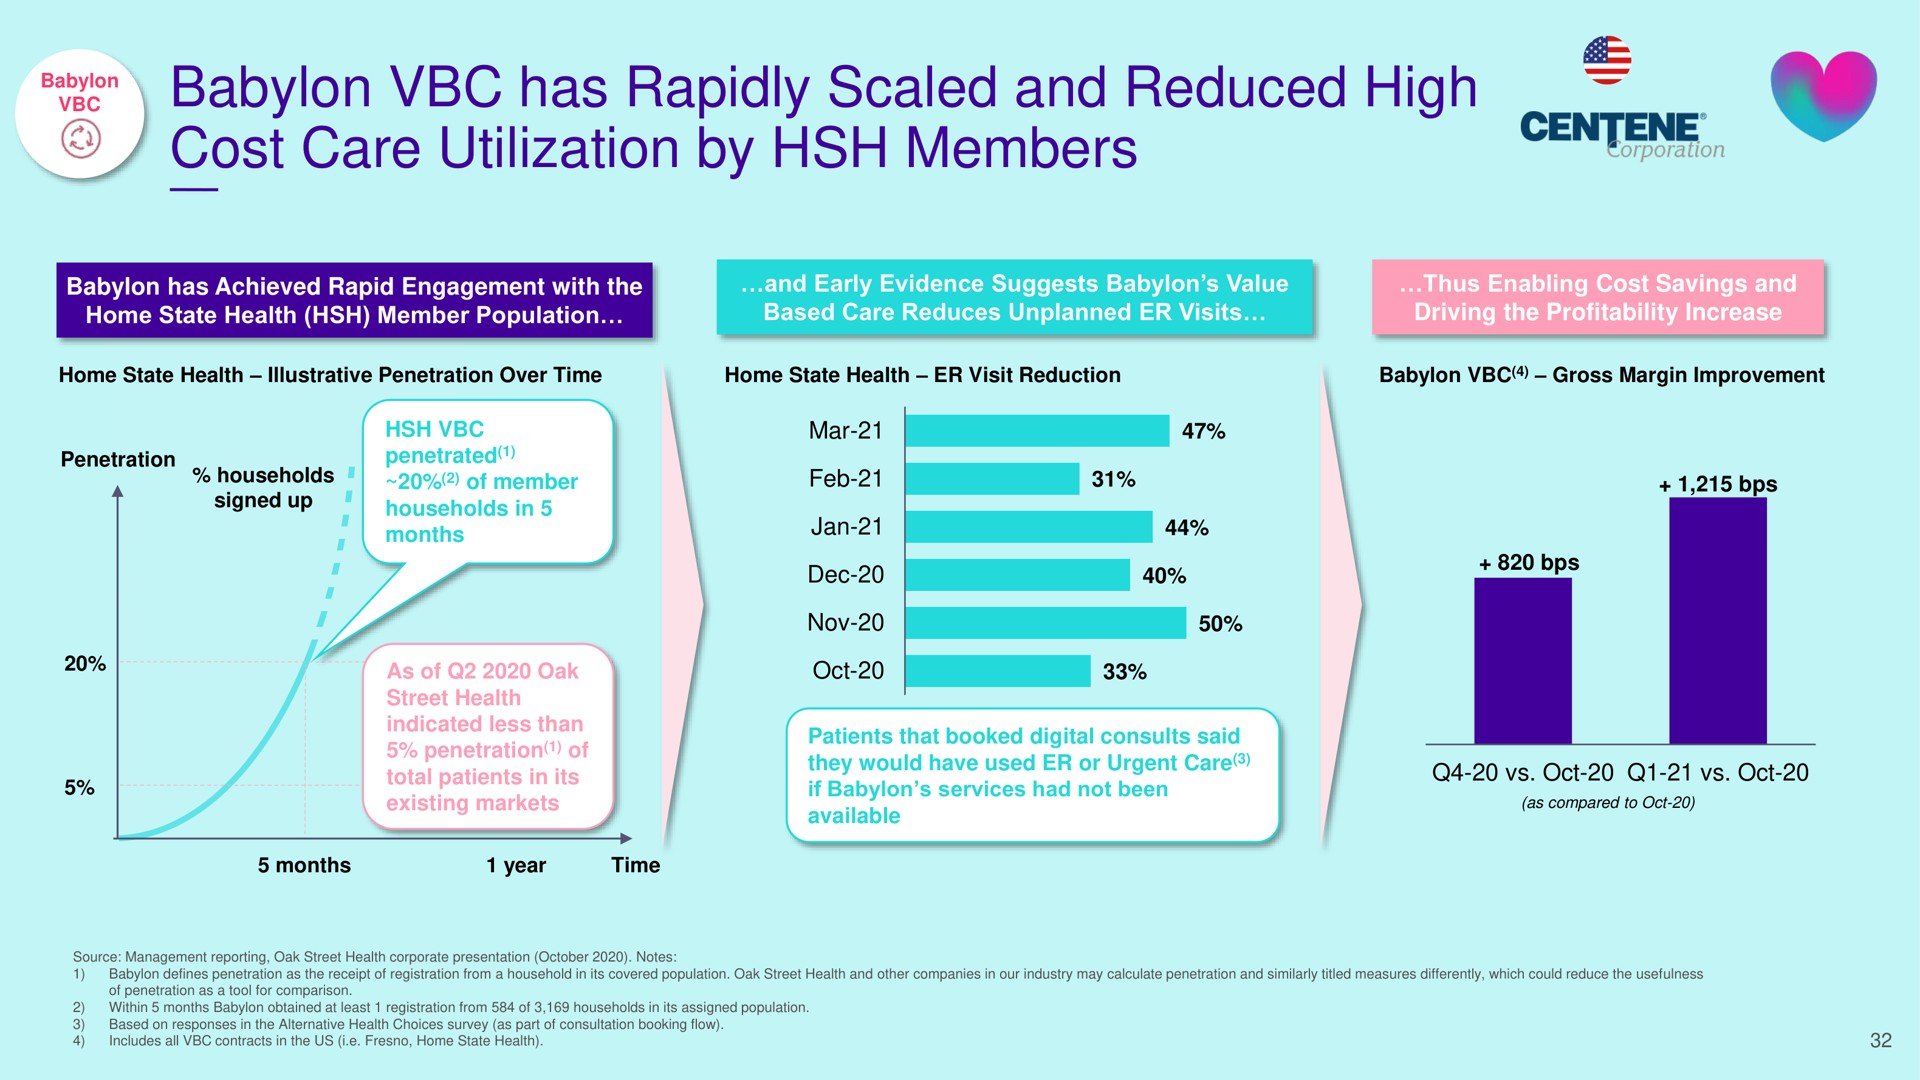 has rapidly scaled and reduced high cost care utilization by members of | Babylon